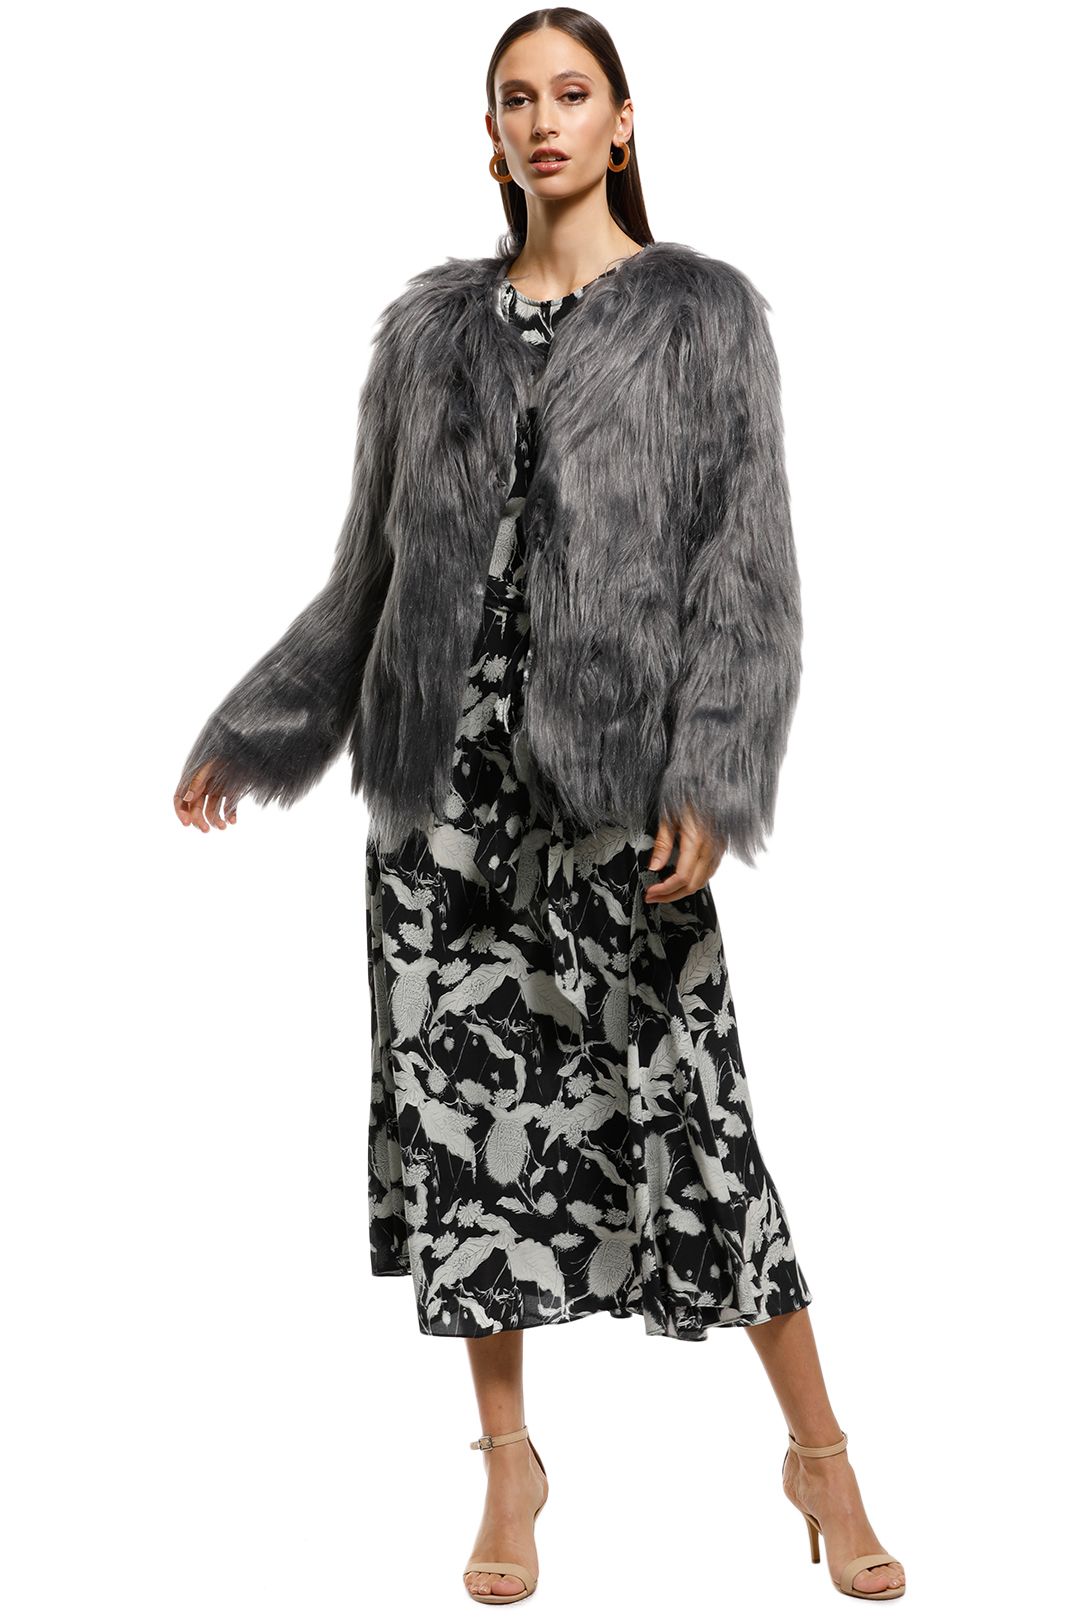 Everly - Marmont Faux Fur Jacket - Dark Grey - Front